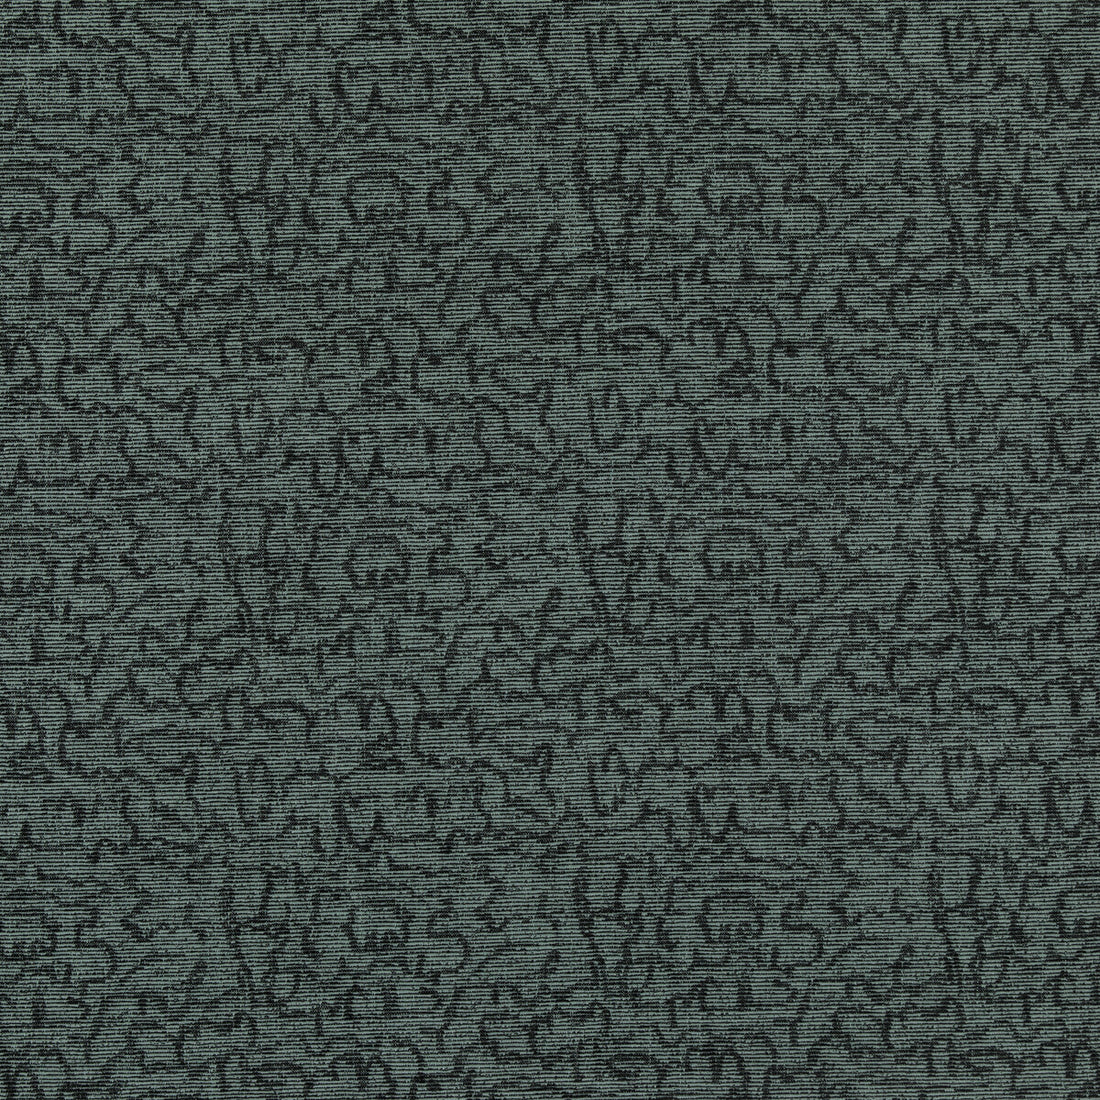 Crescendo fabric in lagoon/ebony color - pattern GWF-3734.538.0 - by Lee Jofa Modern in the Kelly Wearstler IV collection